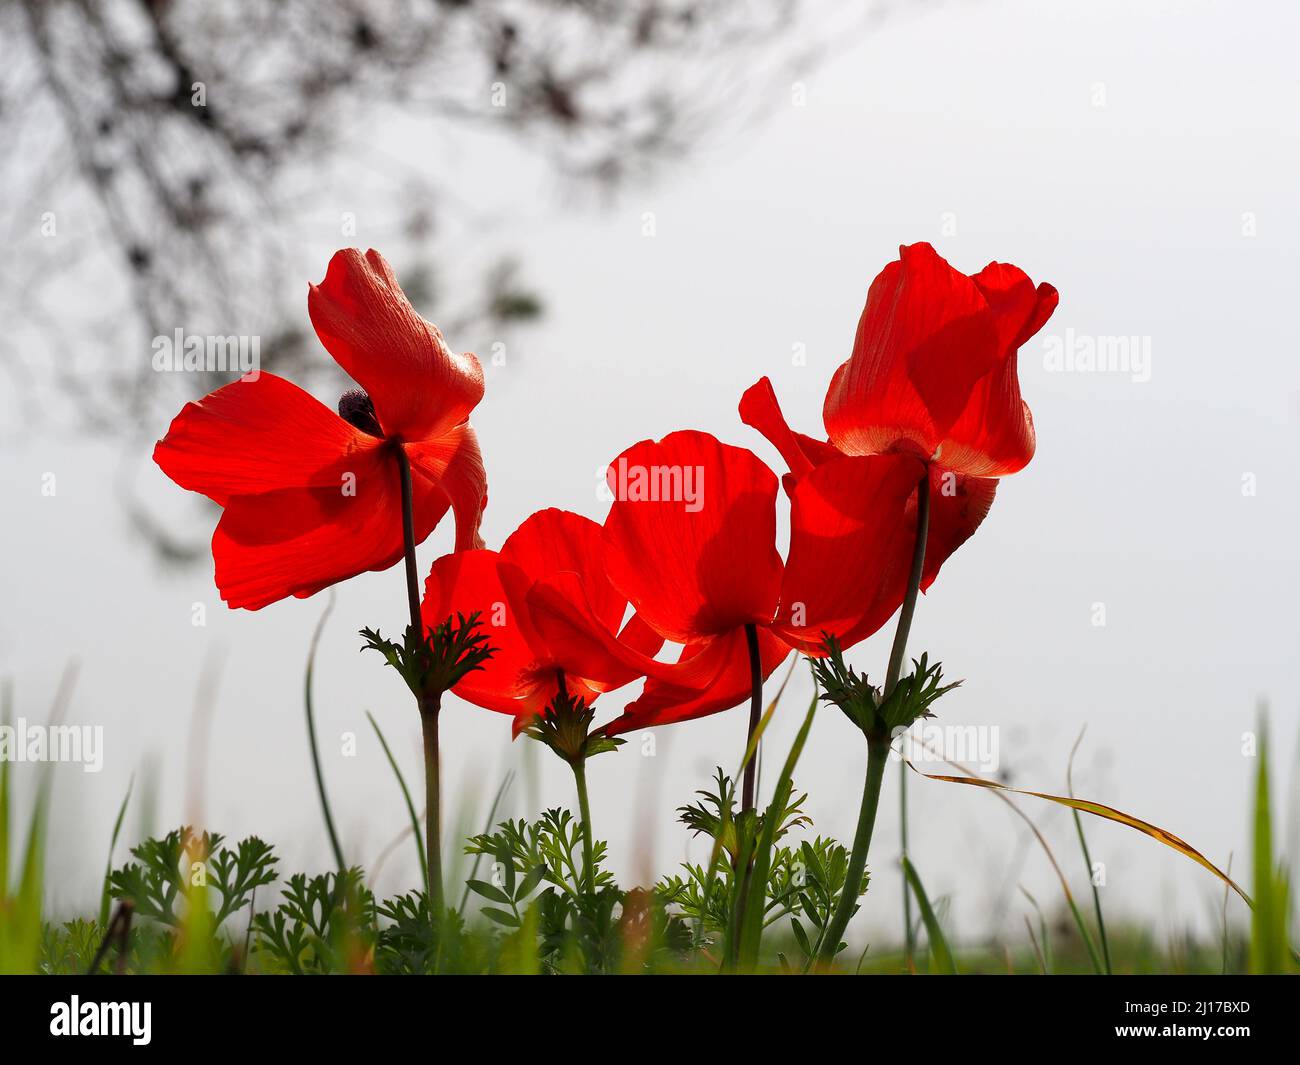 Four red anemones against a cloudy sky. Blurred background. Stock Photo